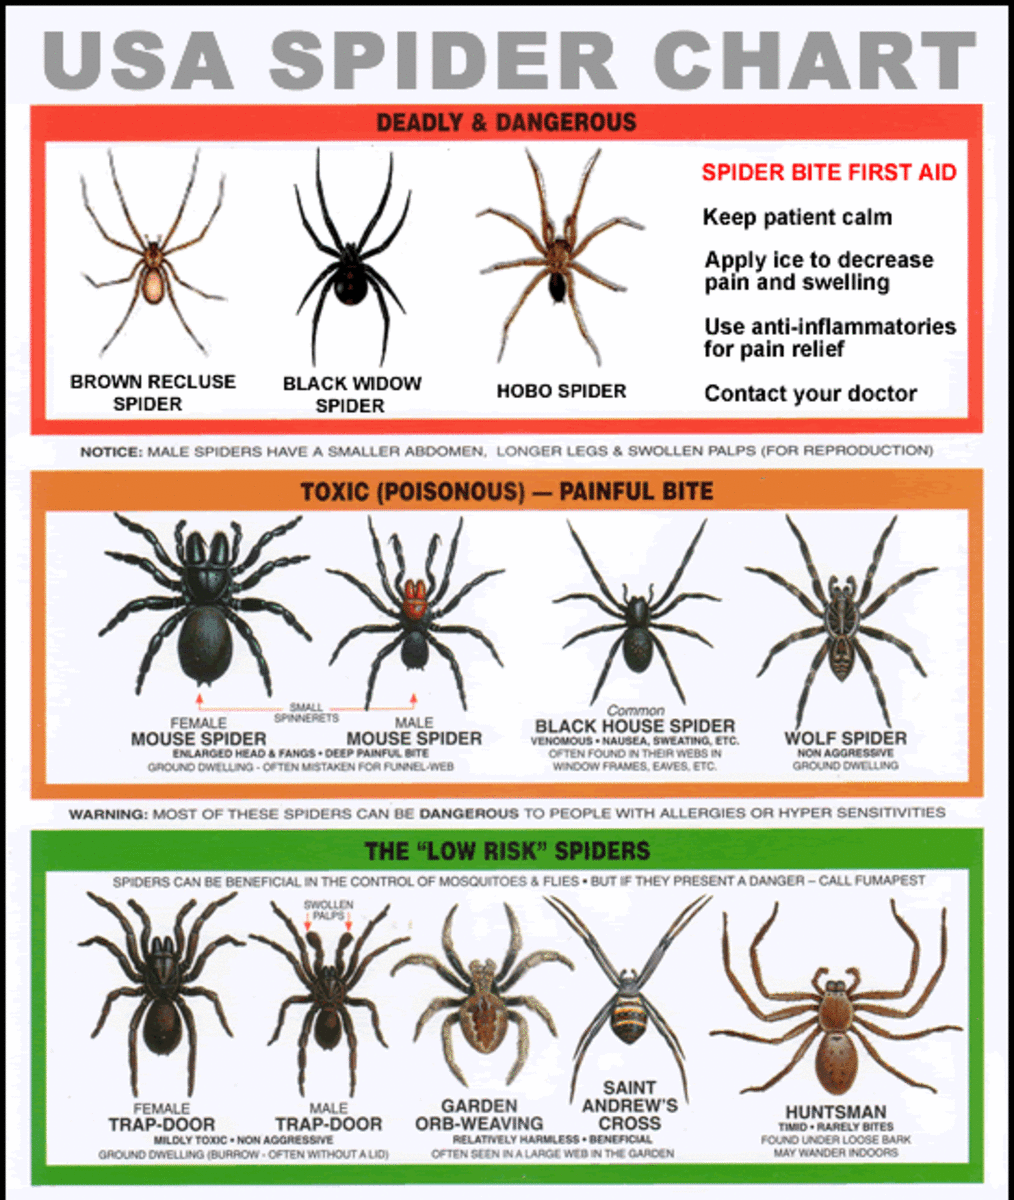 What are the 3 poisonous spiders?